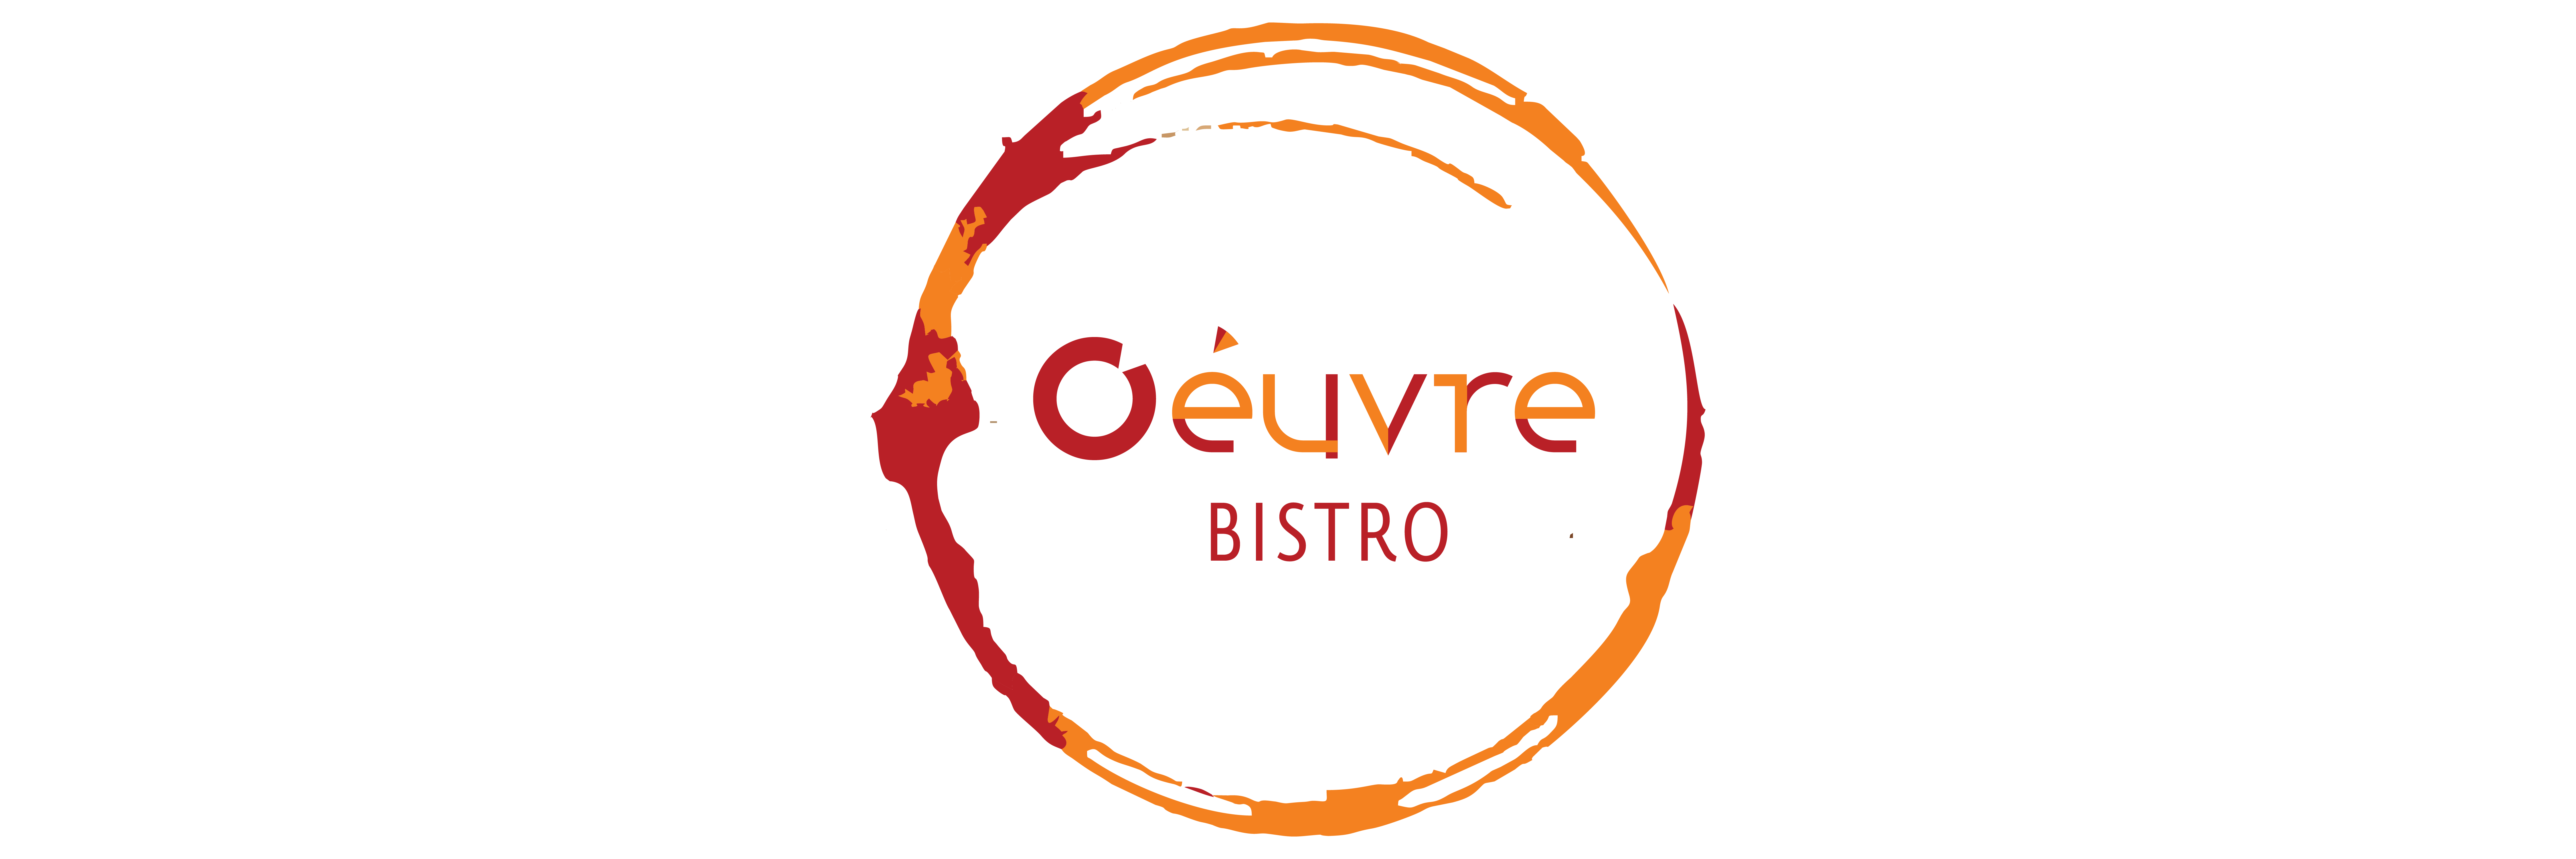 Oeuvre Bistro